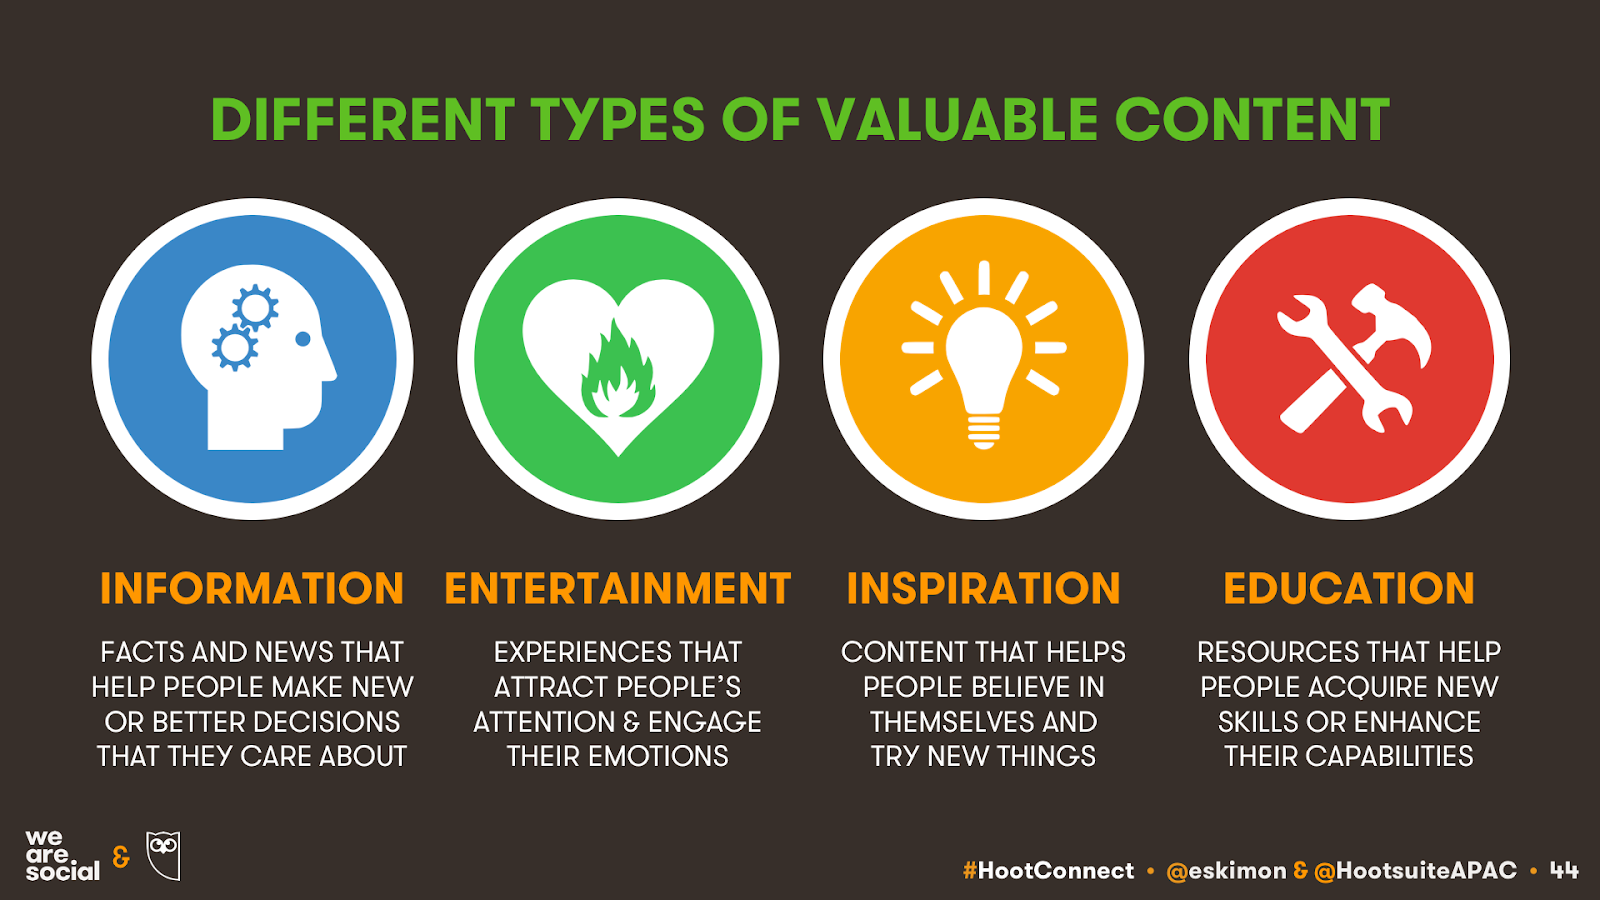 An infographic that details the different types of valuable content. 